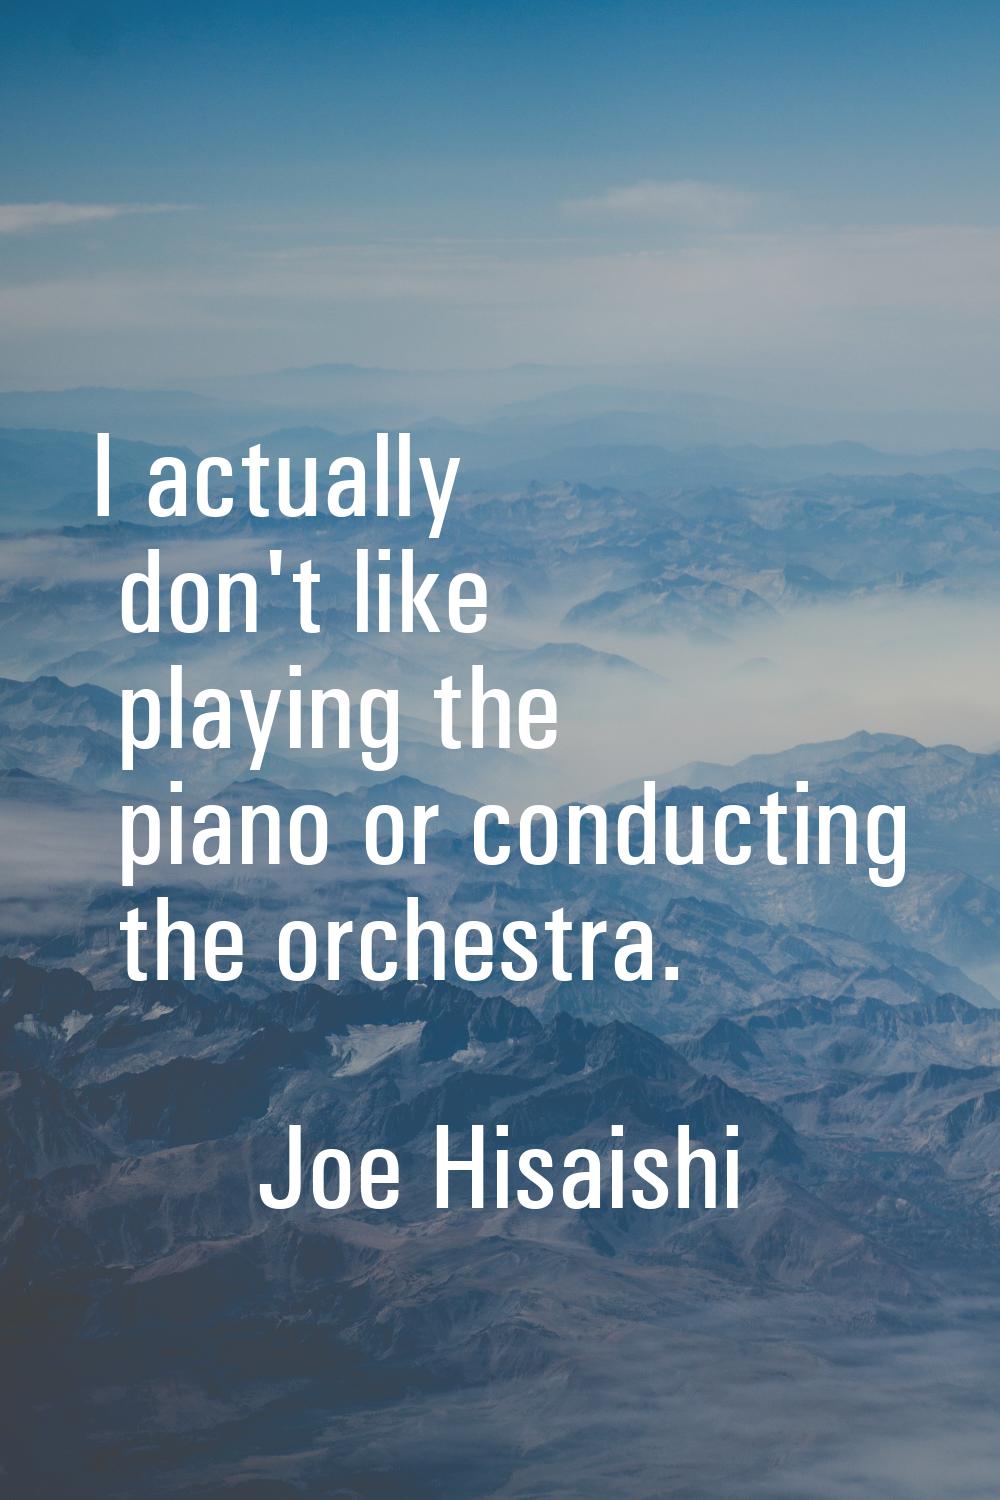 I actually don't like playing the piano or conducting the orchestra.